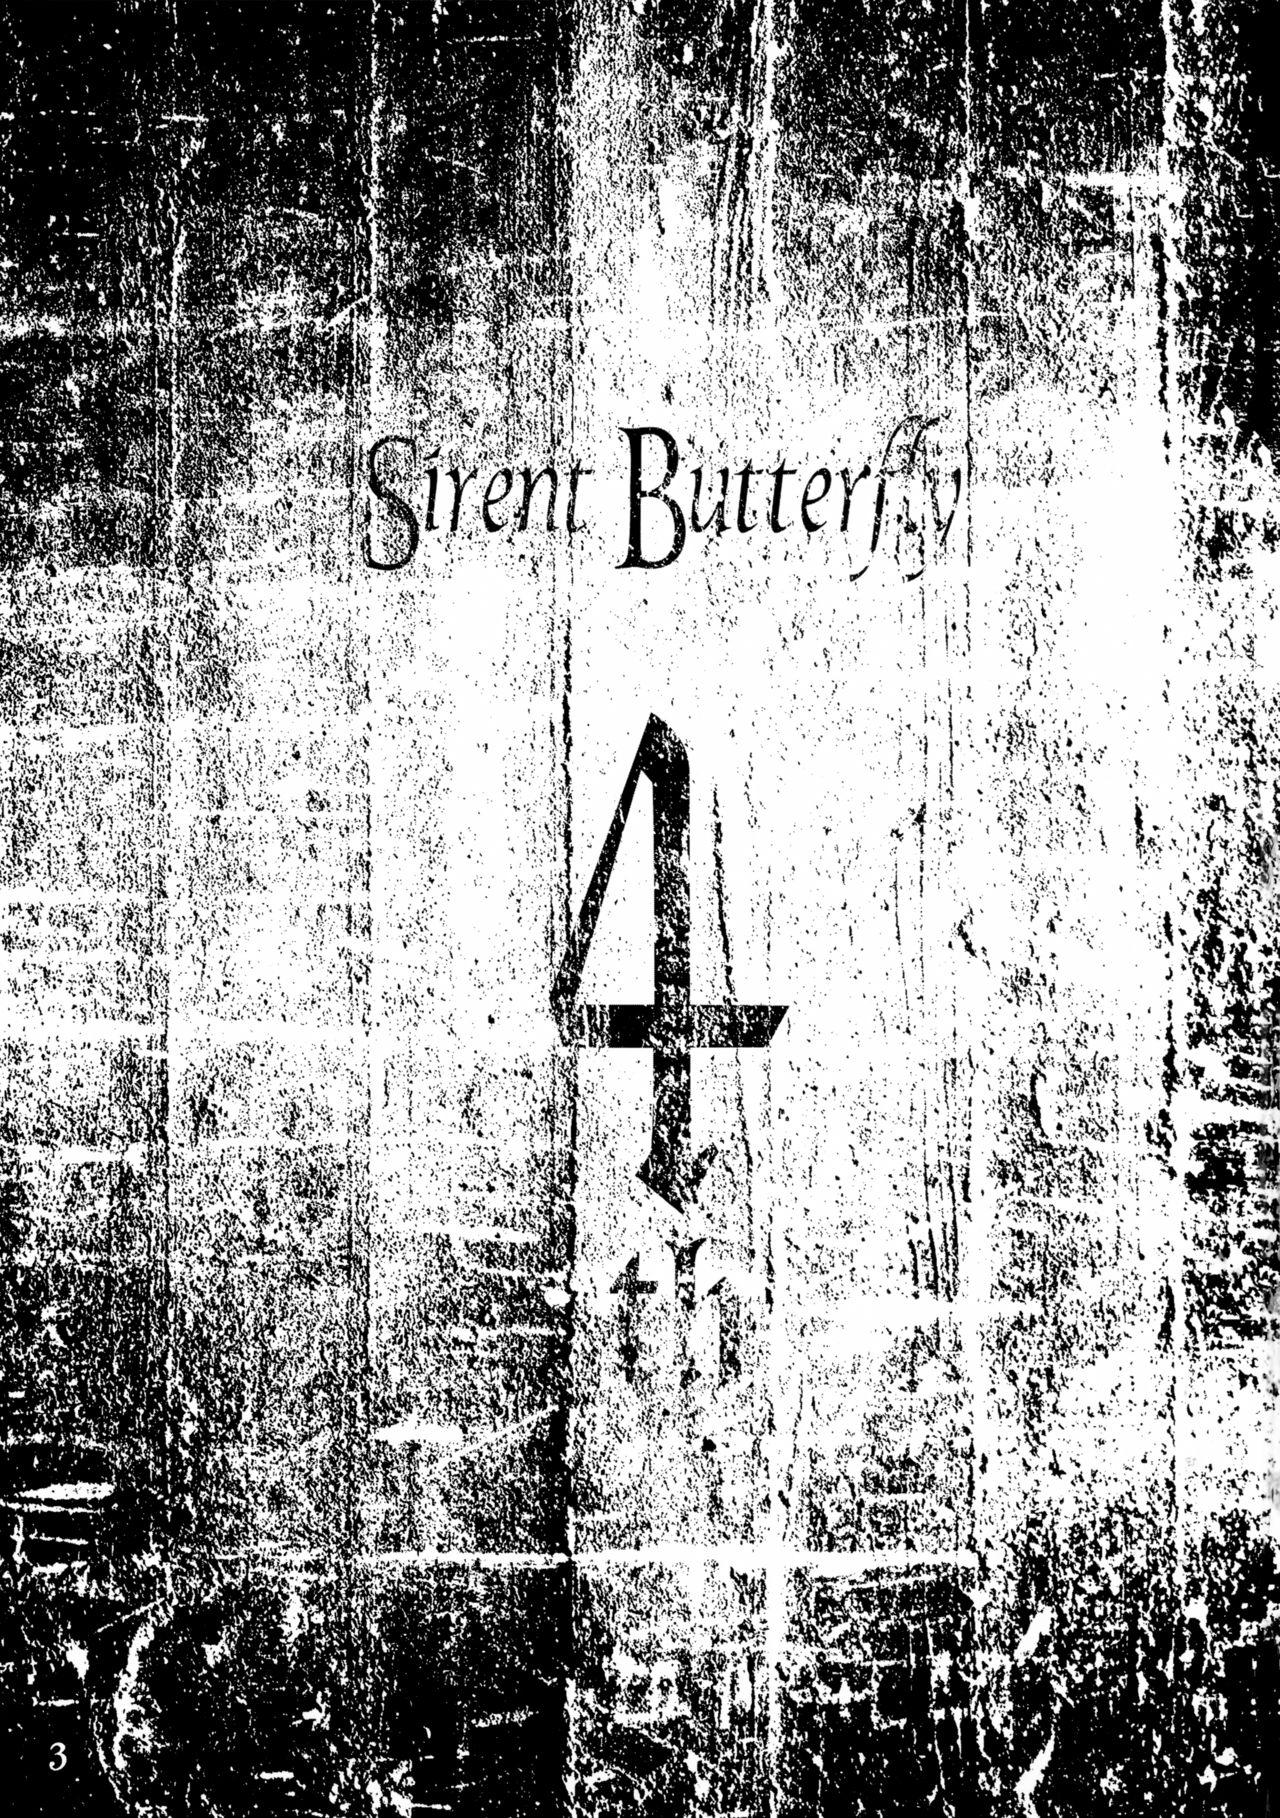 Silent Butterfly 4th 3